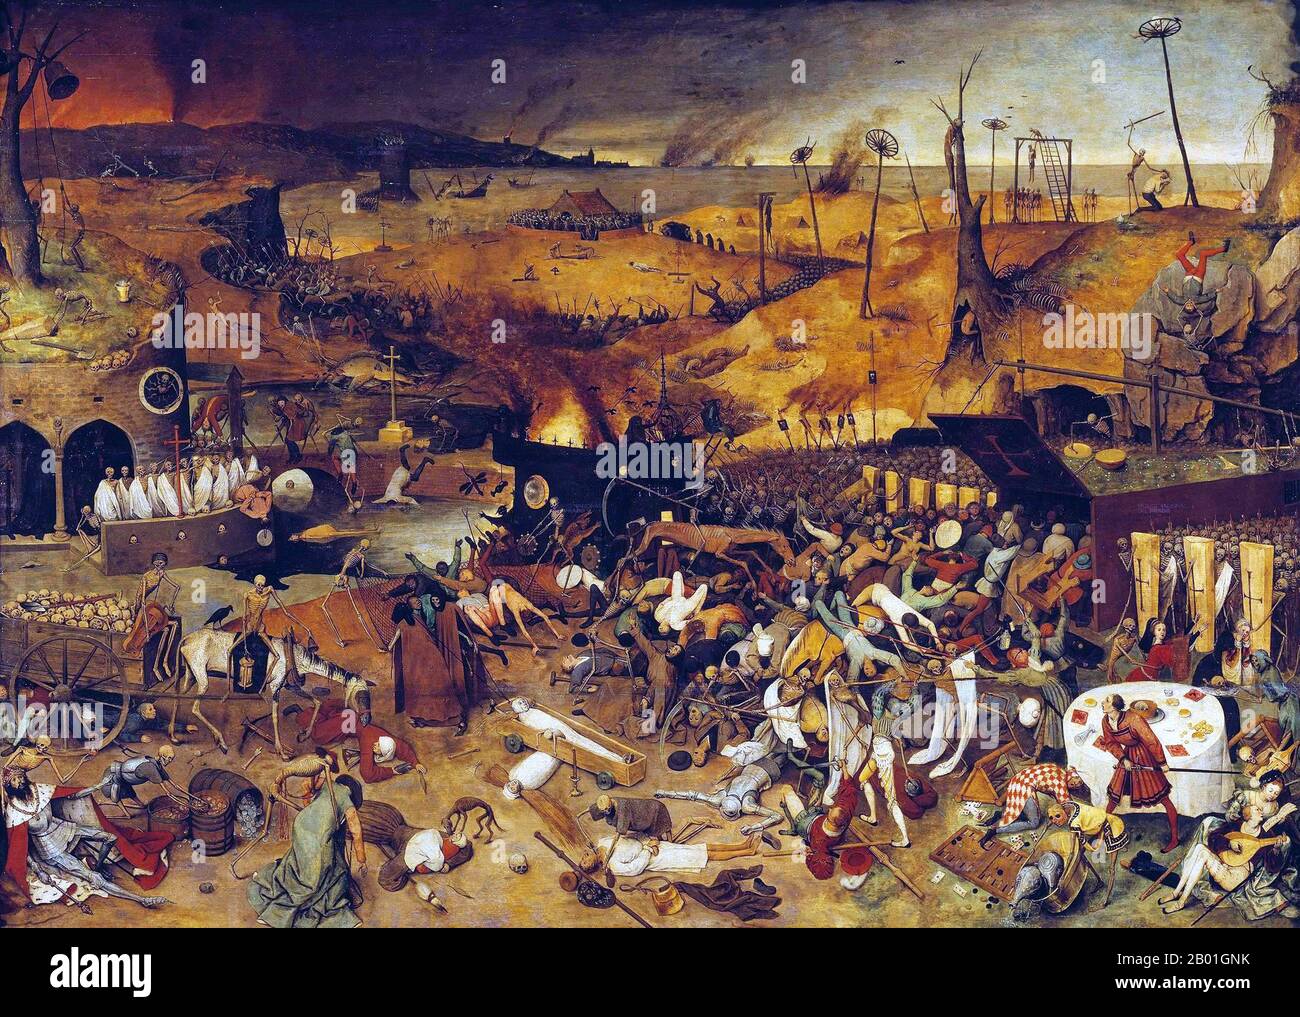 The Triumph of Death is an oil painting on panel, painted c. 1562 by Pieter Bruegel the Elder. It is in the Museo del Prado in Madrid.  The painting is a panoramic landscape: the sky in the distance is blackened by smoke from burning cities and the sea is littered with shipwrecks. Armies of skeletons advance on the living, who either flee in terror or try vainly to fight back. In the foreground, skeletons haul a wagon full of skulls, and ring the bell that signifies the death knell of the world. A fool plays the lute while a skeleton behind him plays along; a starving dog nibbles at the face o Stock Photo